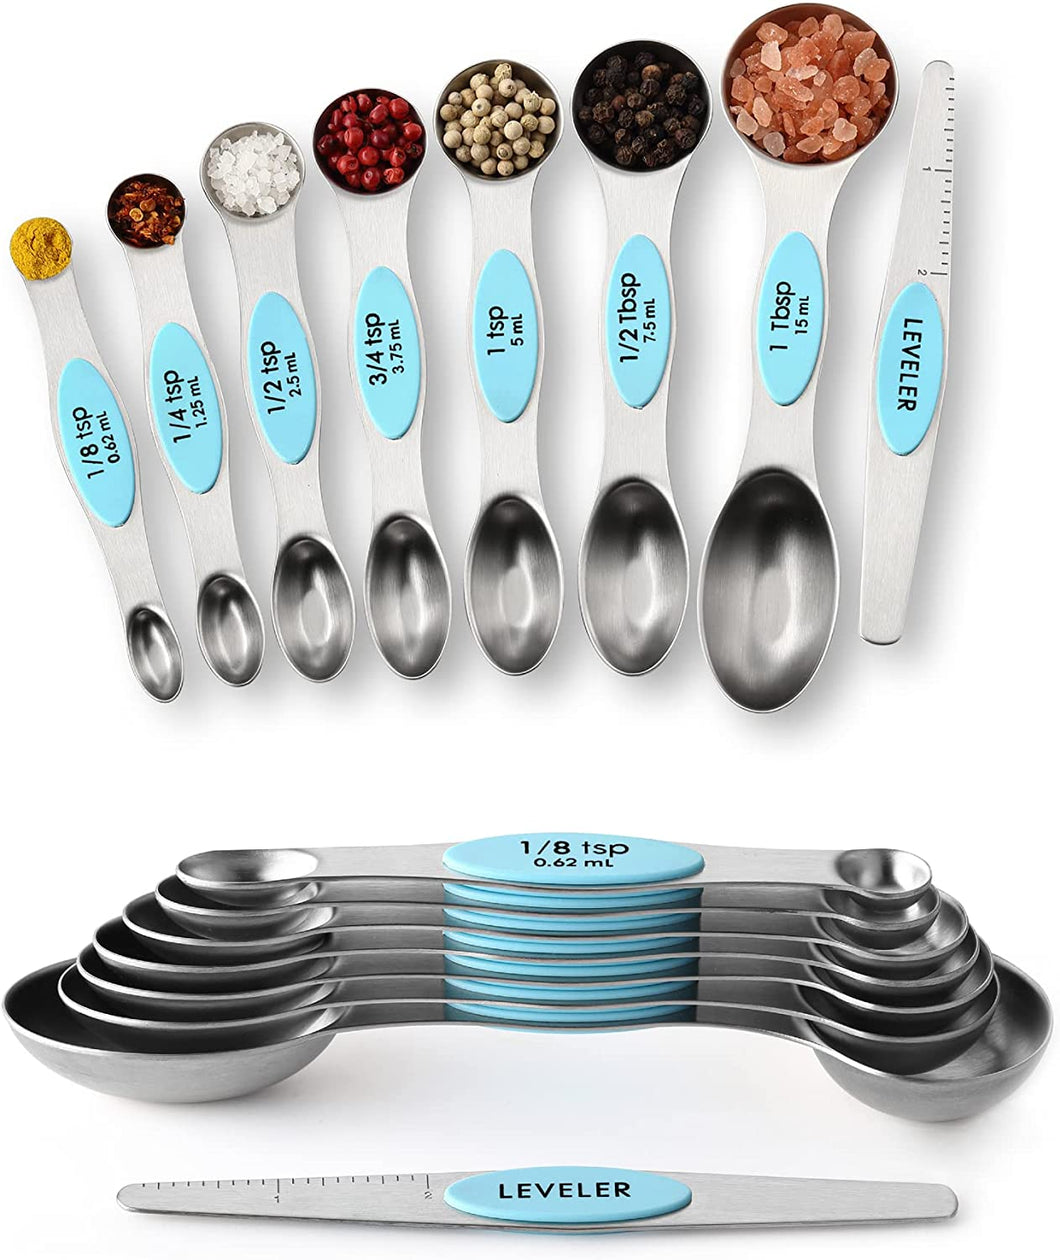  rimaxao [9 Pack] Magnetic Measuring Spoons Set Dual Sided Measuring  Scoop Stainless Steel Measuring Spoons for Dry or Liquid Food, Silver(9  Pack), MEDIUM: Home & Kitchen